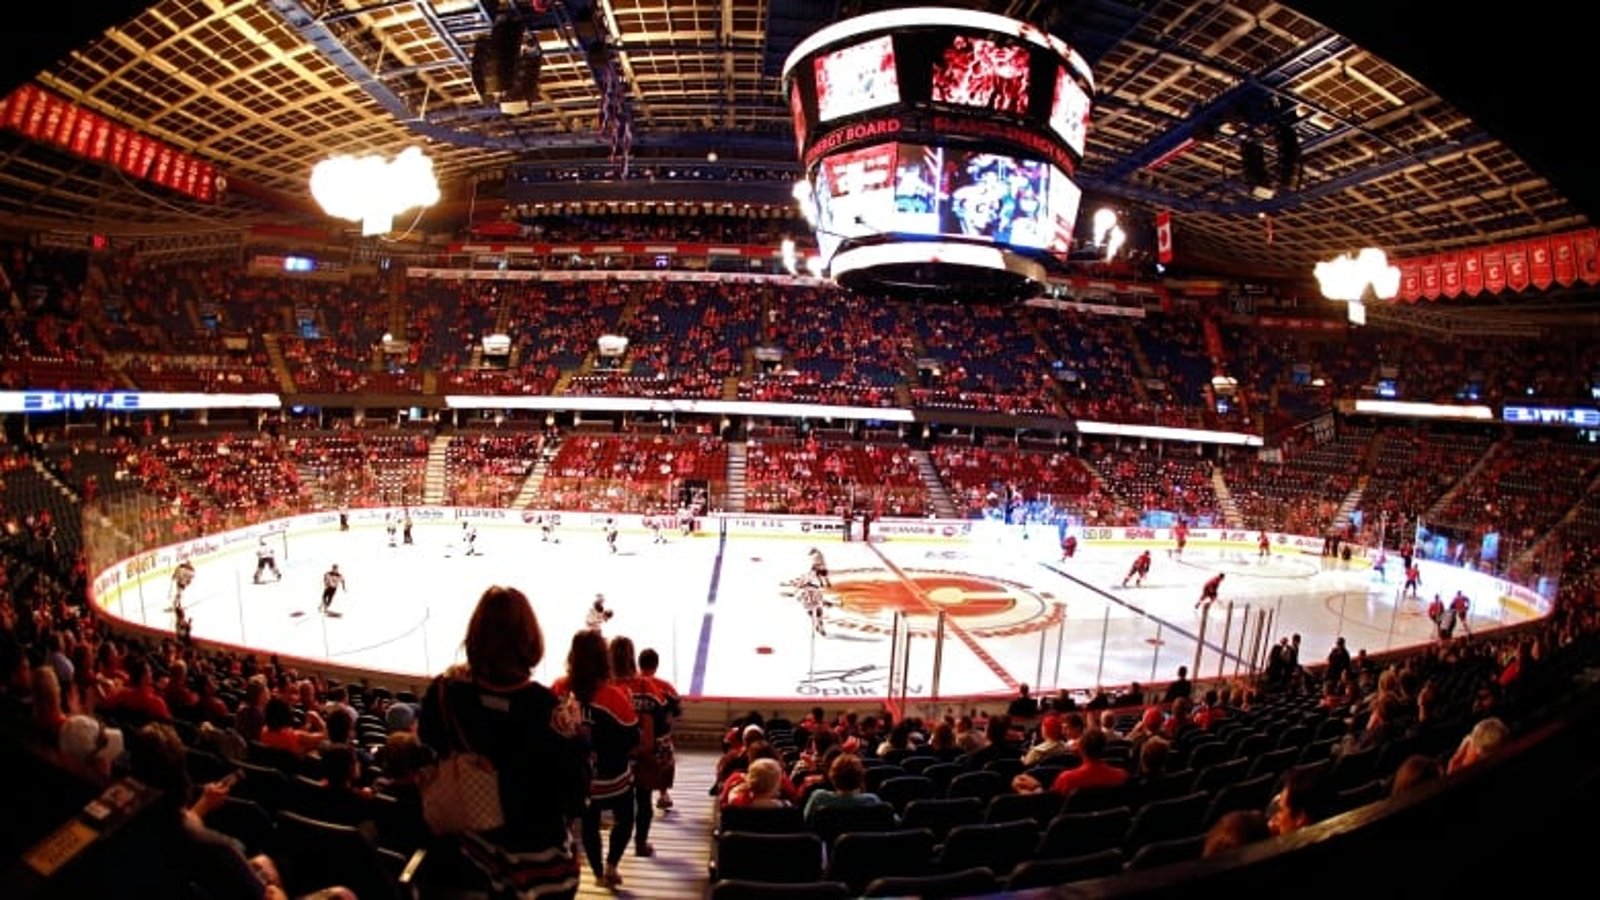 Calgary cancels all NHL events until July 